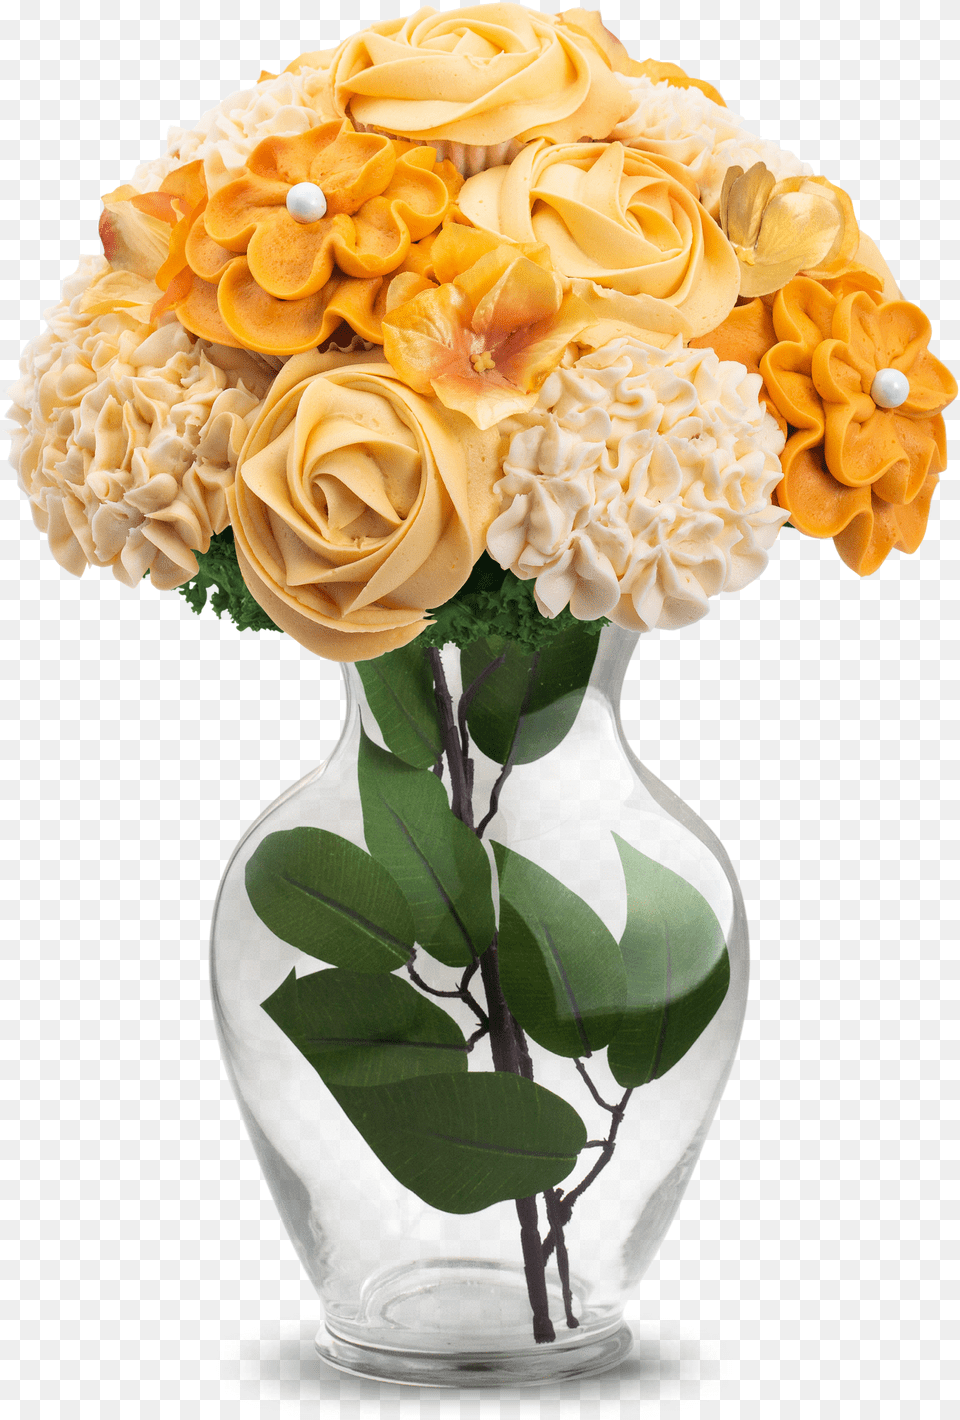 Baked Bouquet Flower U0026 Cupcake Bouquets For Delivery Cupcake Bouquet Long Stem Free Png Download